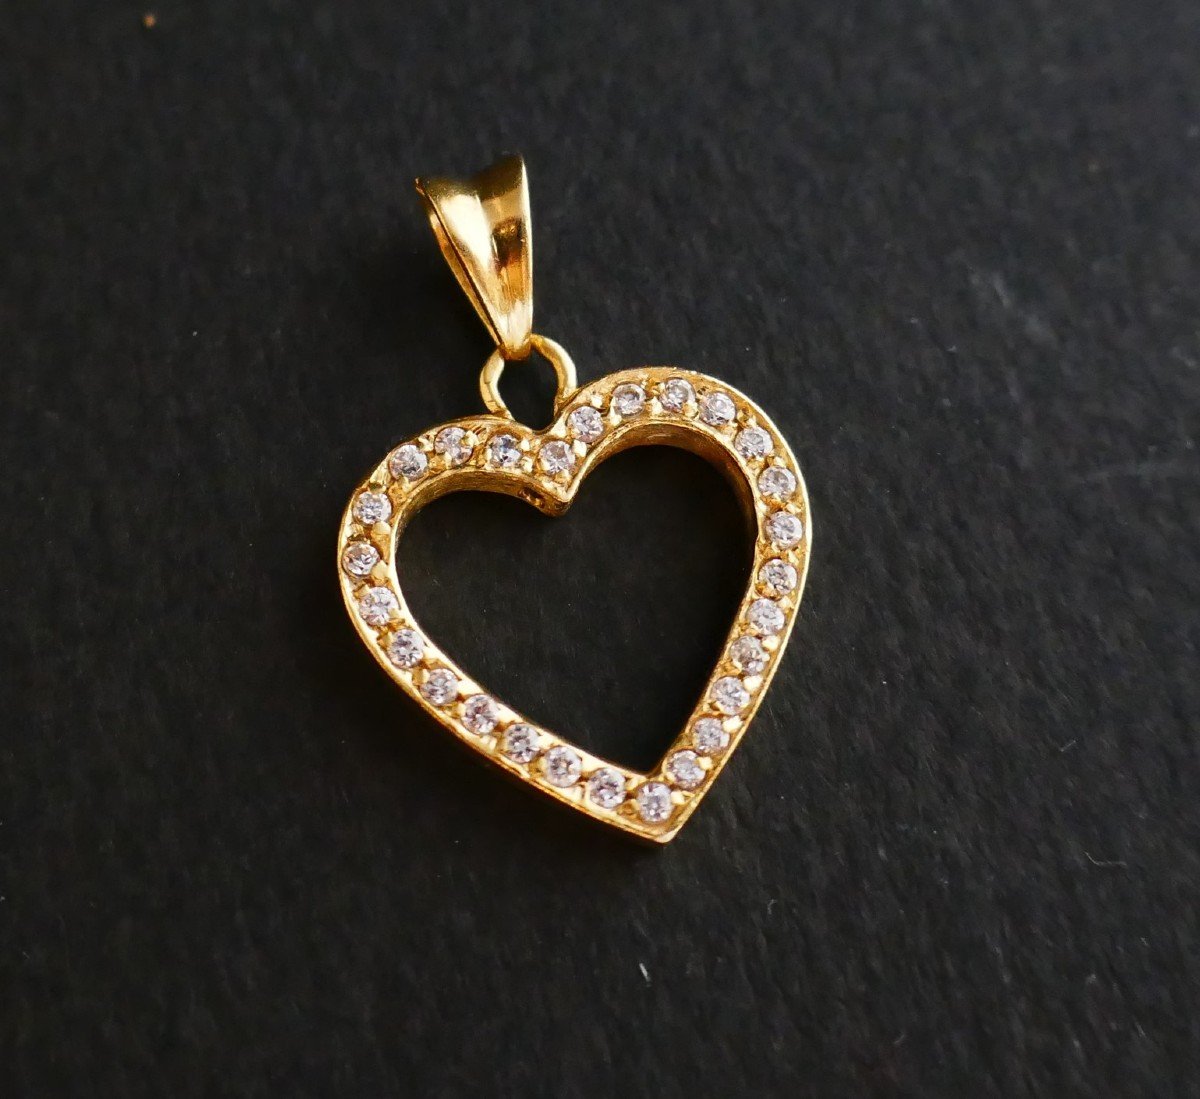 Heart Pendant Set With White Sapphires, 18-carat Gold Chain.-photo-3